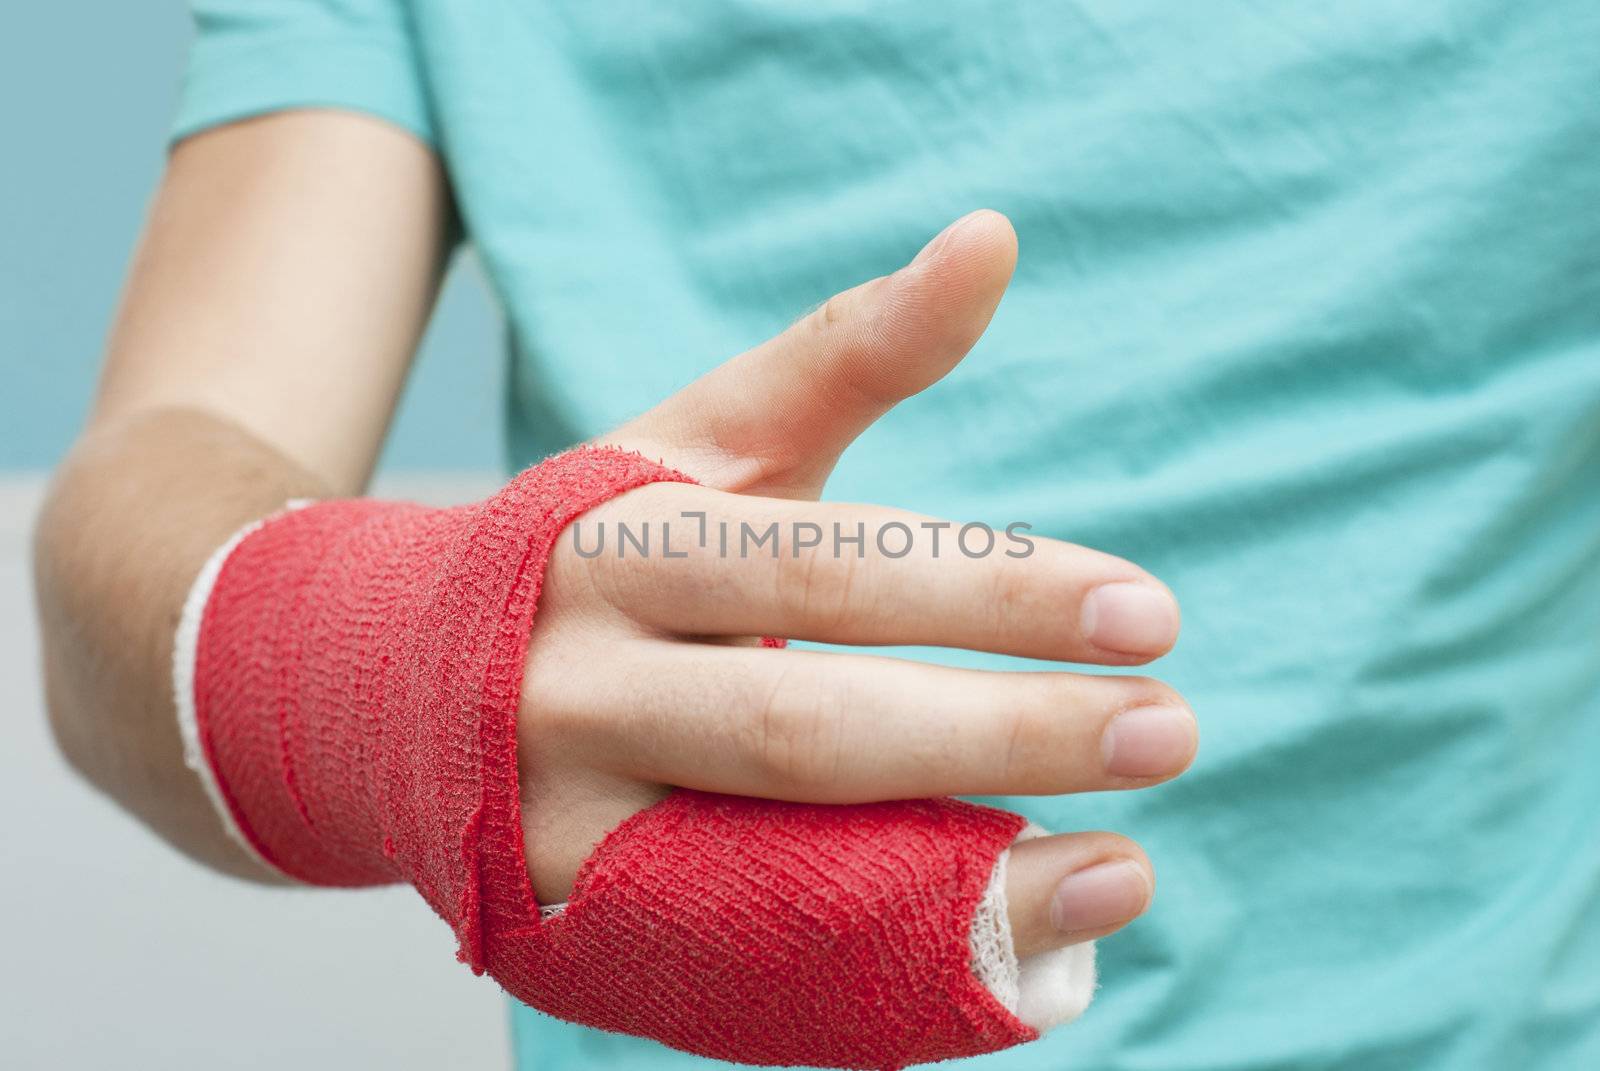 Injured male hand with upper part of body. Hand is bandaged with red plaster focus set on thumb